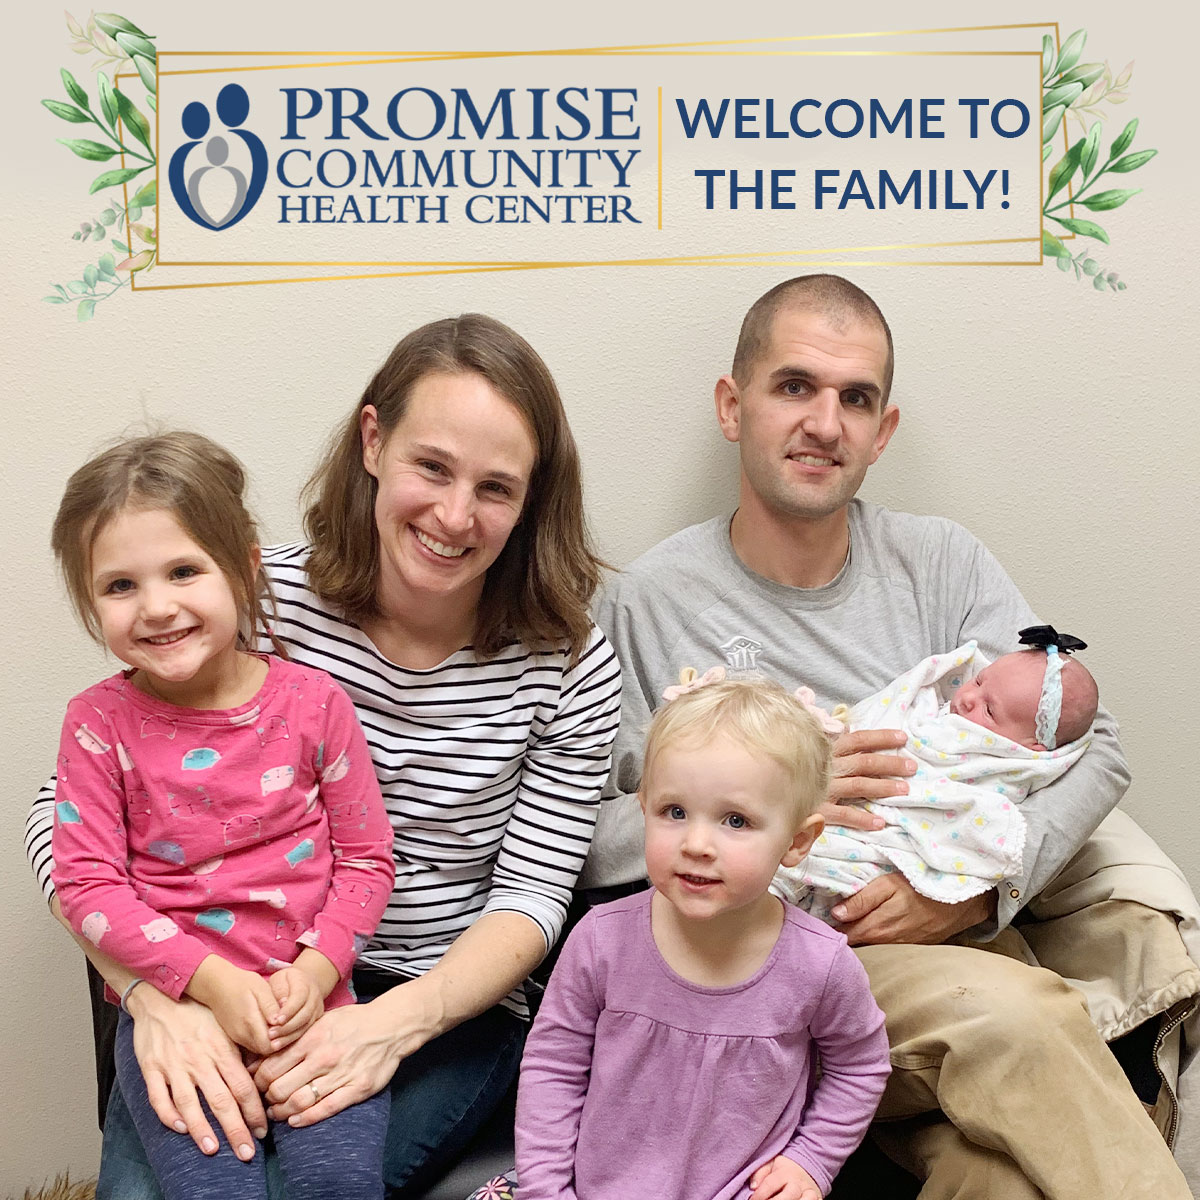 Kurt and Kelly Franje, from Rock Valley, Iowa | Promise Community Health Center in Sioux Center, Iowa | Home births in northwest Iowa, Home births in southeast South Dakota, Home births in southwest Minnesota | Home births in Sioux Falls South Dakota, Home births in Beresford South Dakota, Home births in Sioux City IA, Home births in LeMars IA, Home births in Worthington MN, Home births in Iowa, Home births in South Dakota, Home births in Minnesota